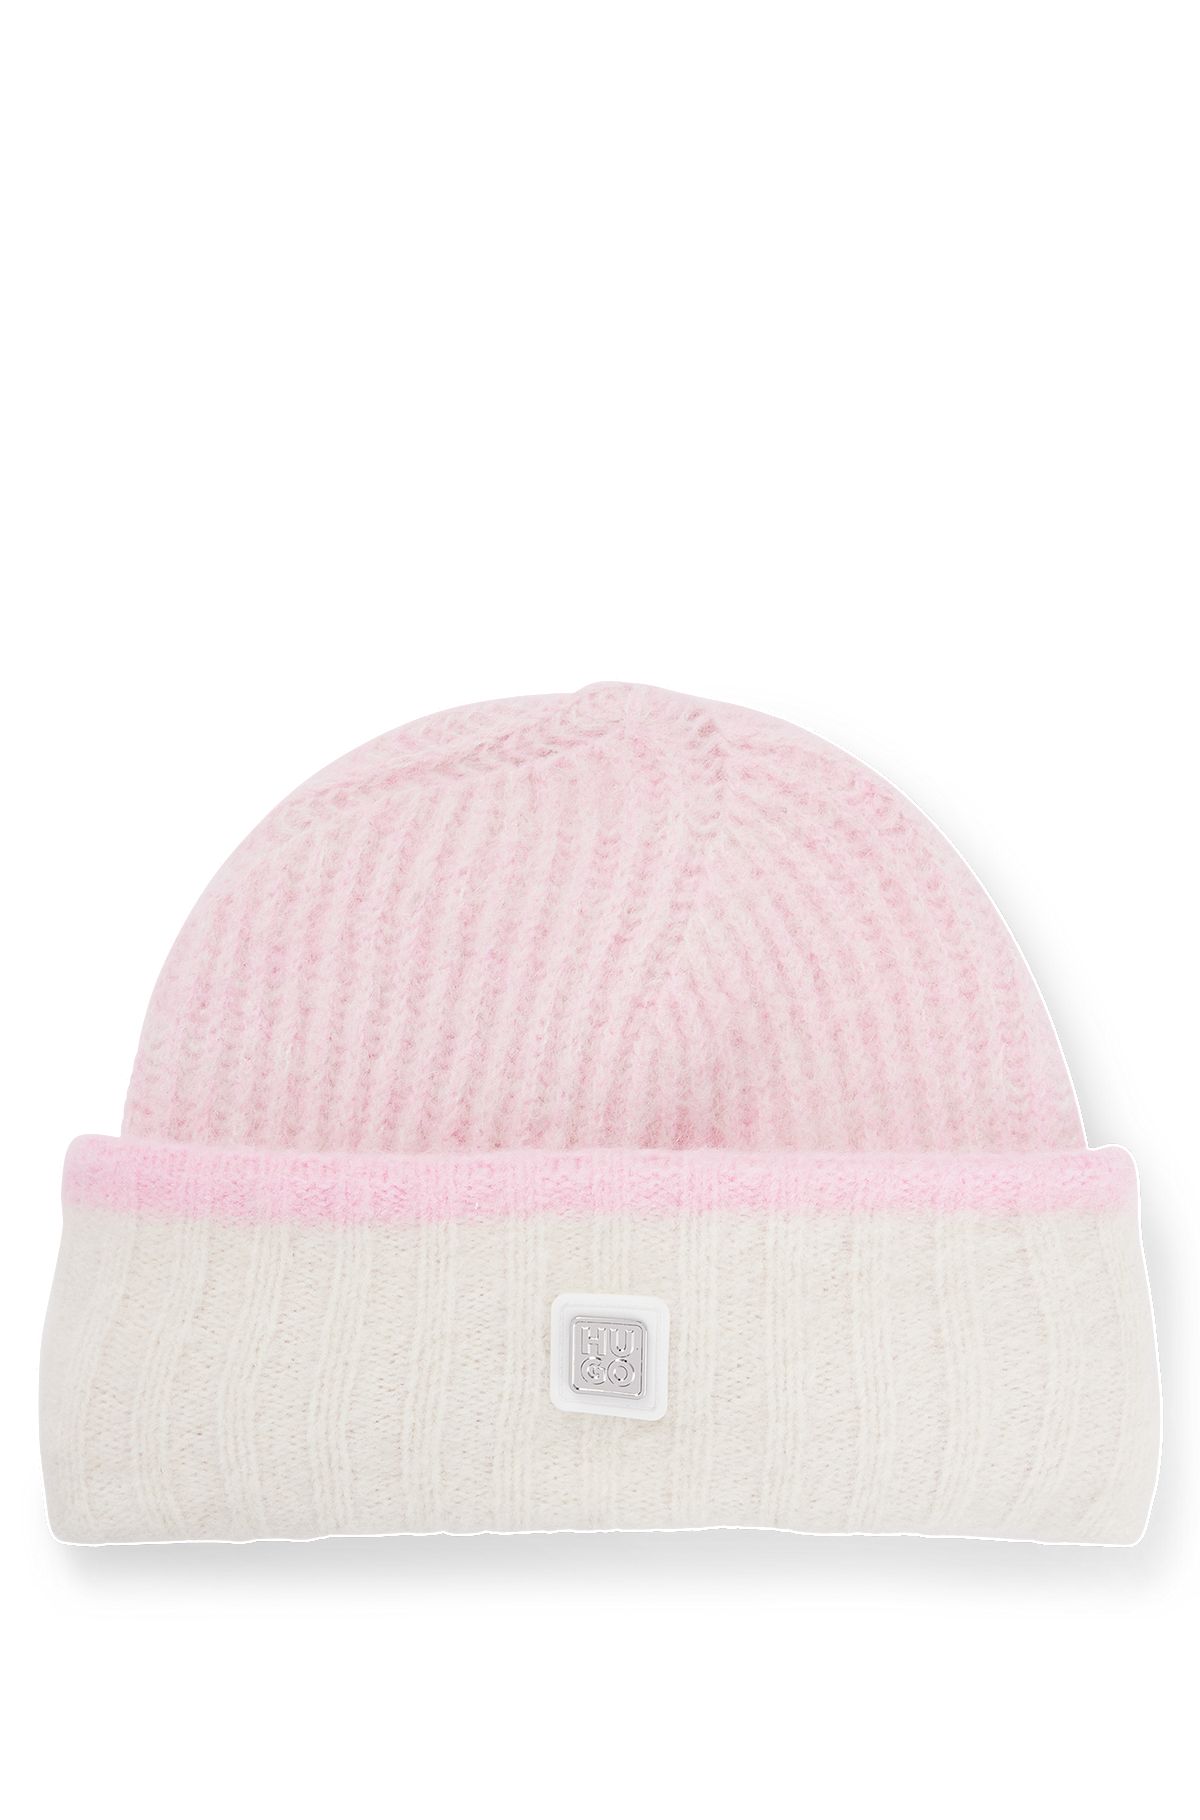 Colour-block beanie hat with stacked-logo trim, light pink